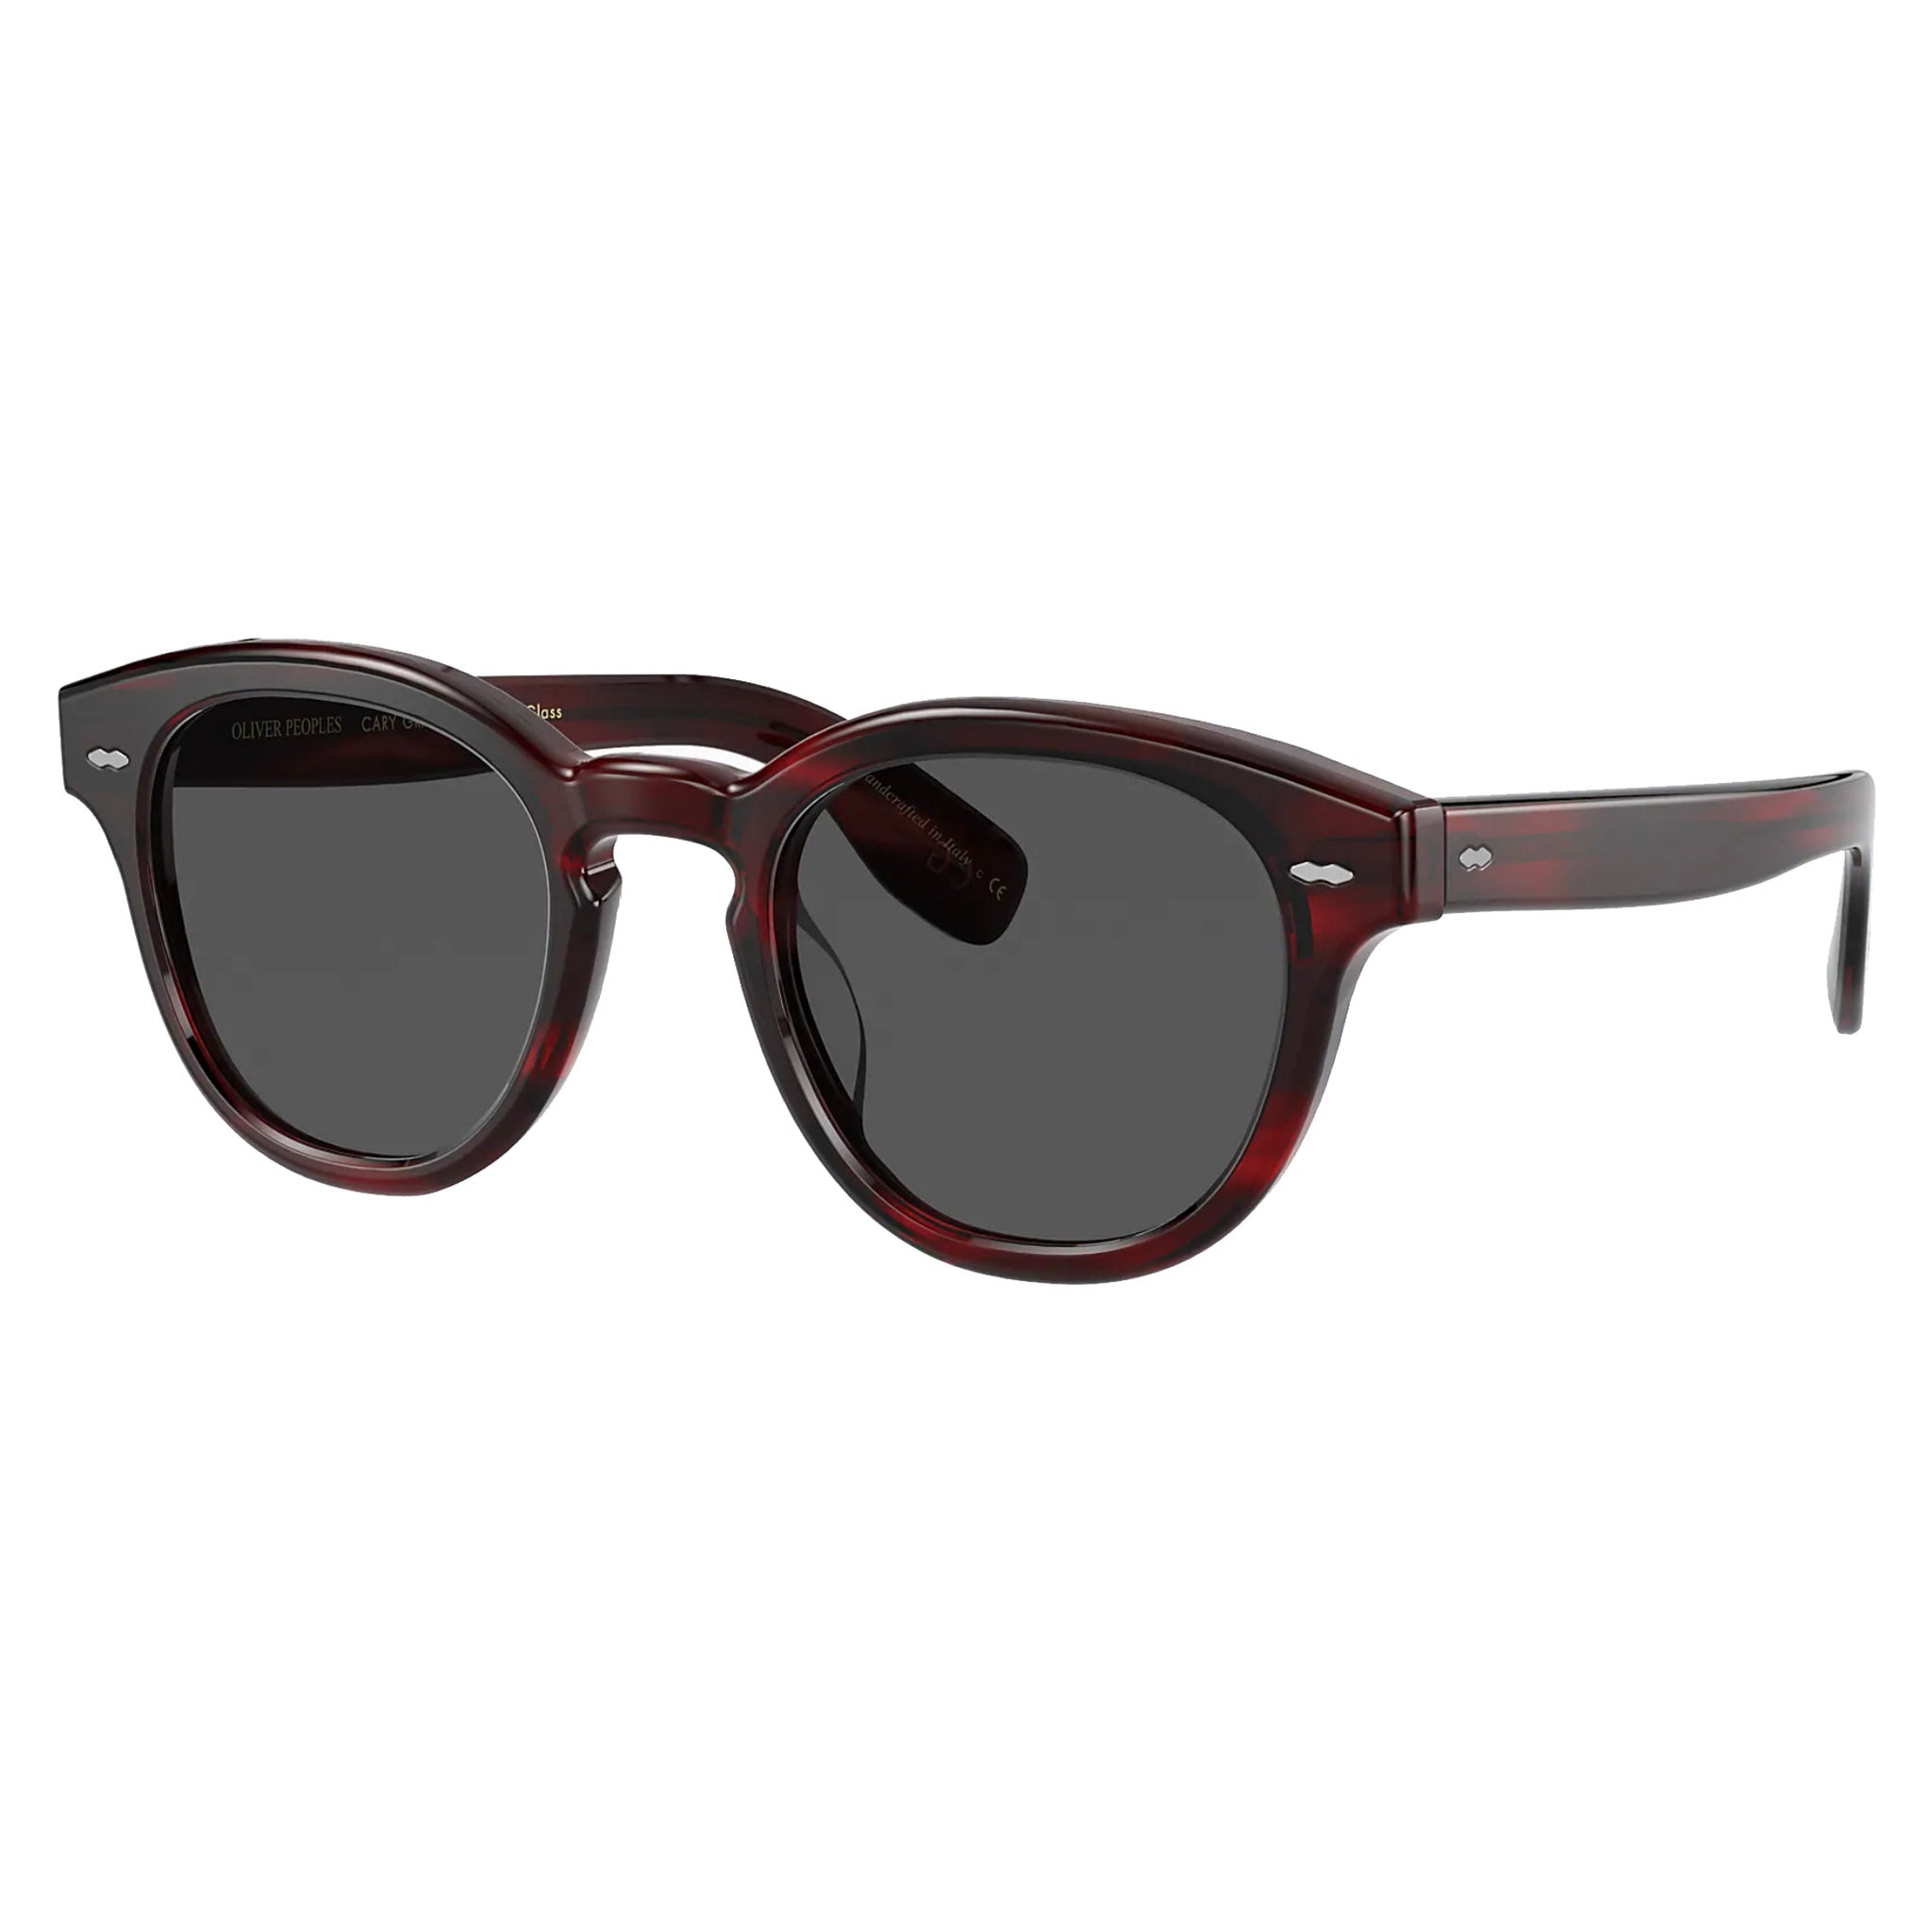 Oliver Peoples Cary Grant Sun Bordeaux Bark with Carbon Grey Sunglasses